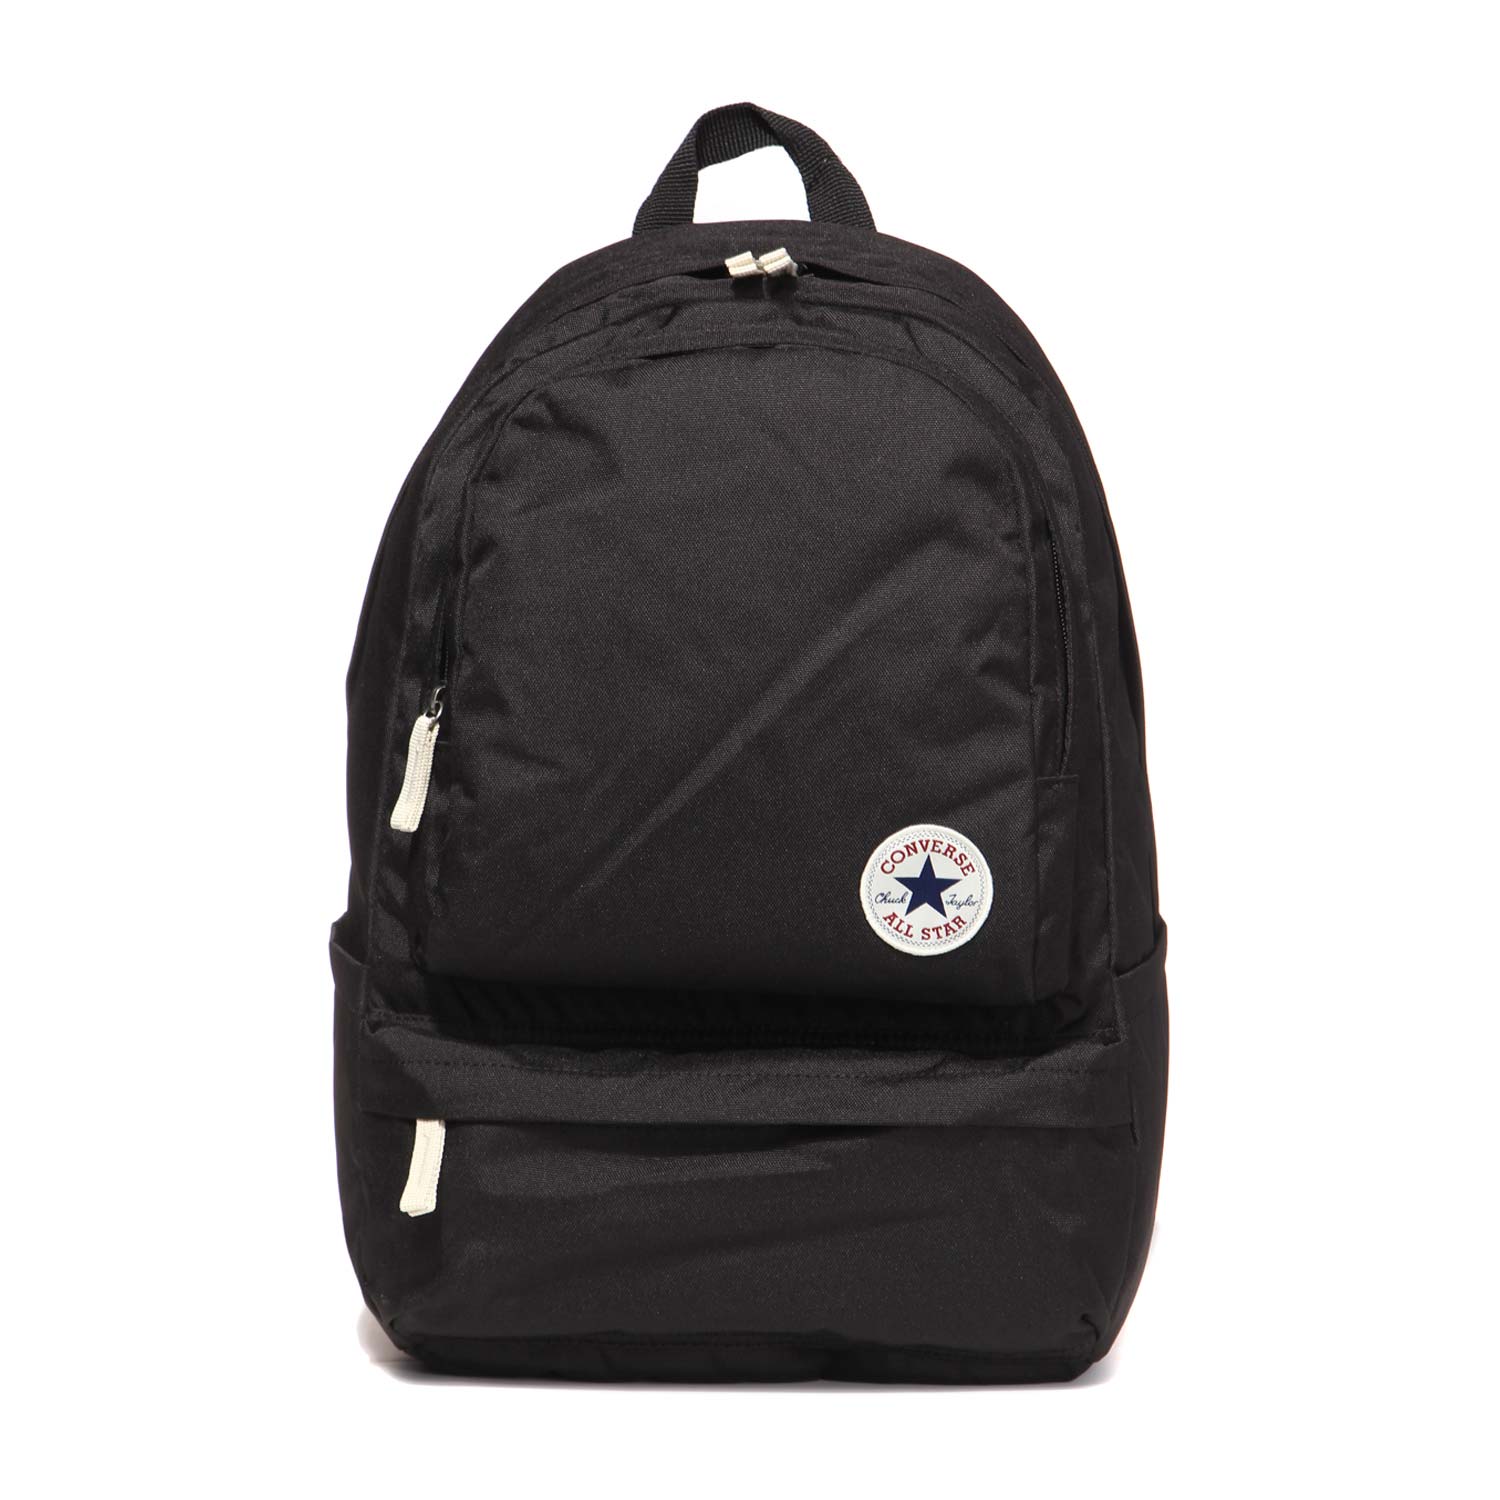 converse backpack 2016